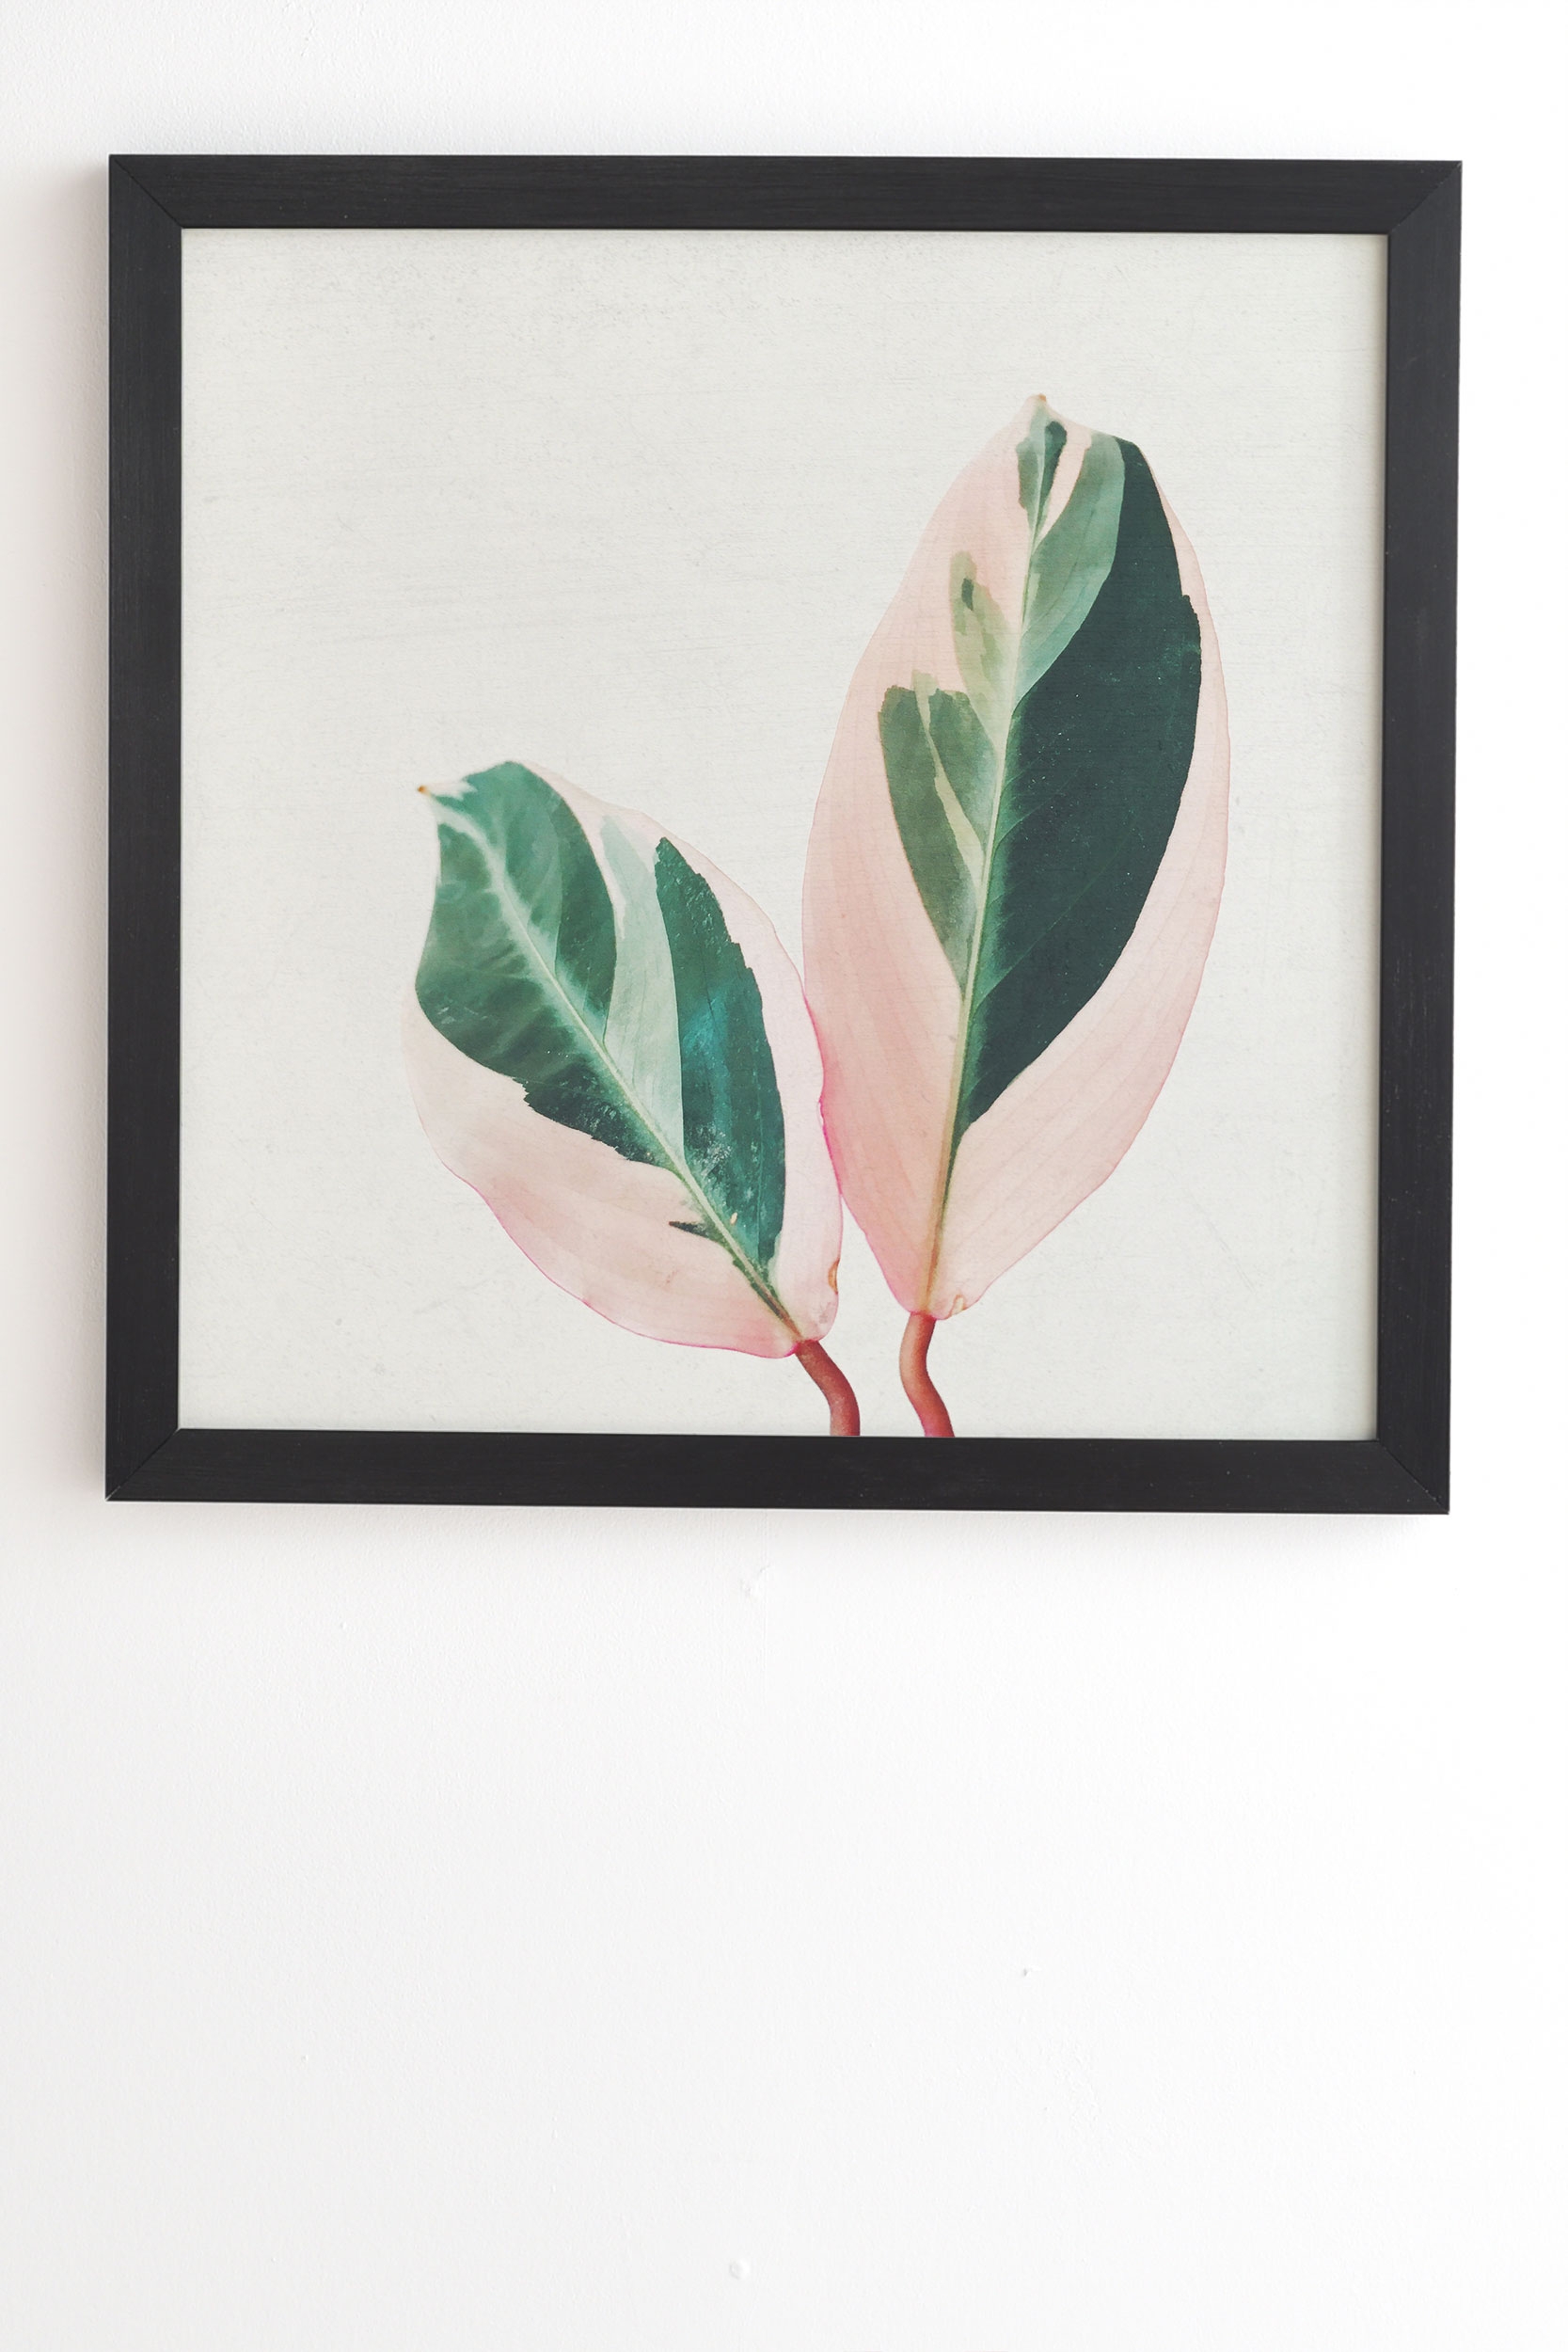 Pink Leaves I by Cassia Beck - Framed Wall Art Basic Black 20" x 20" - Image 1